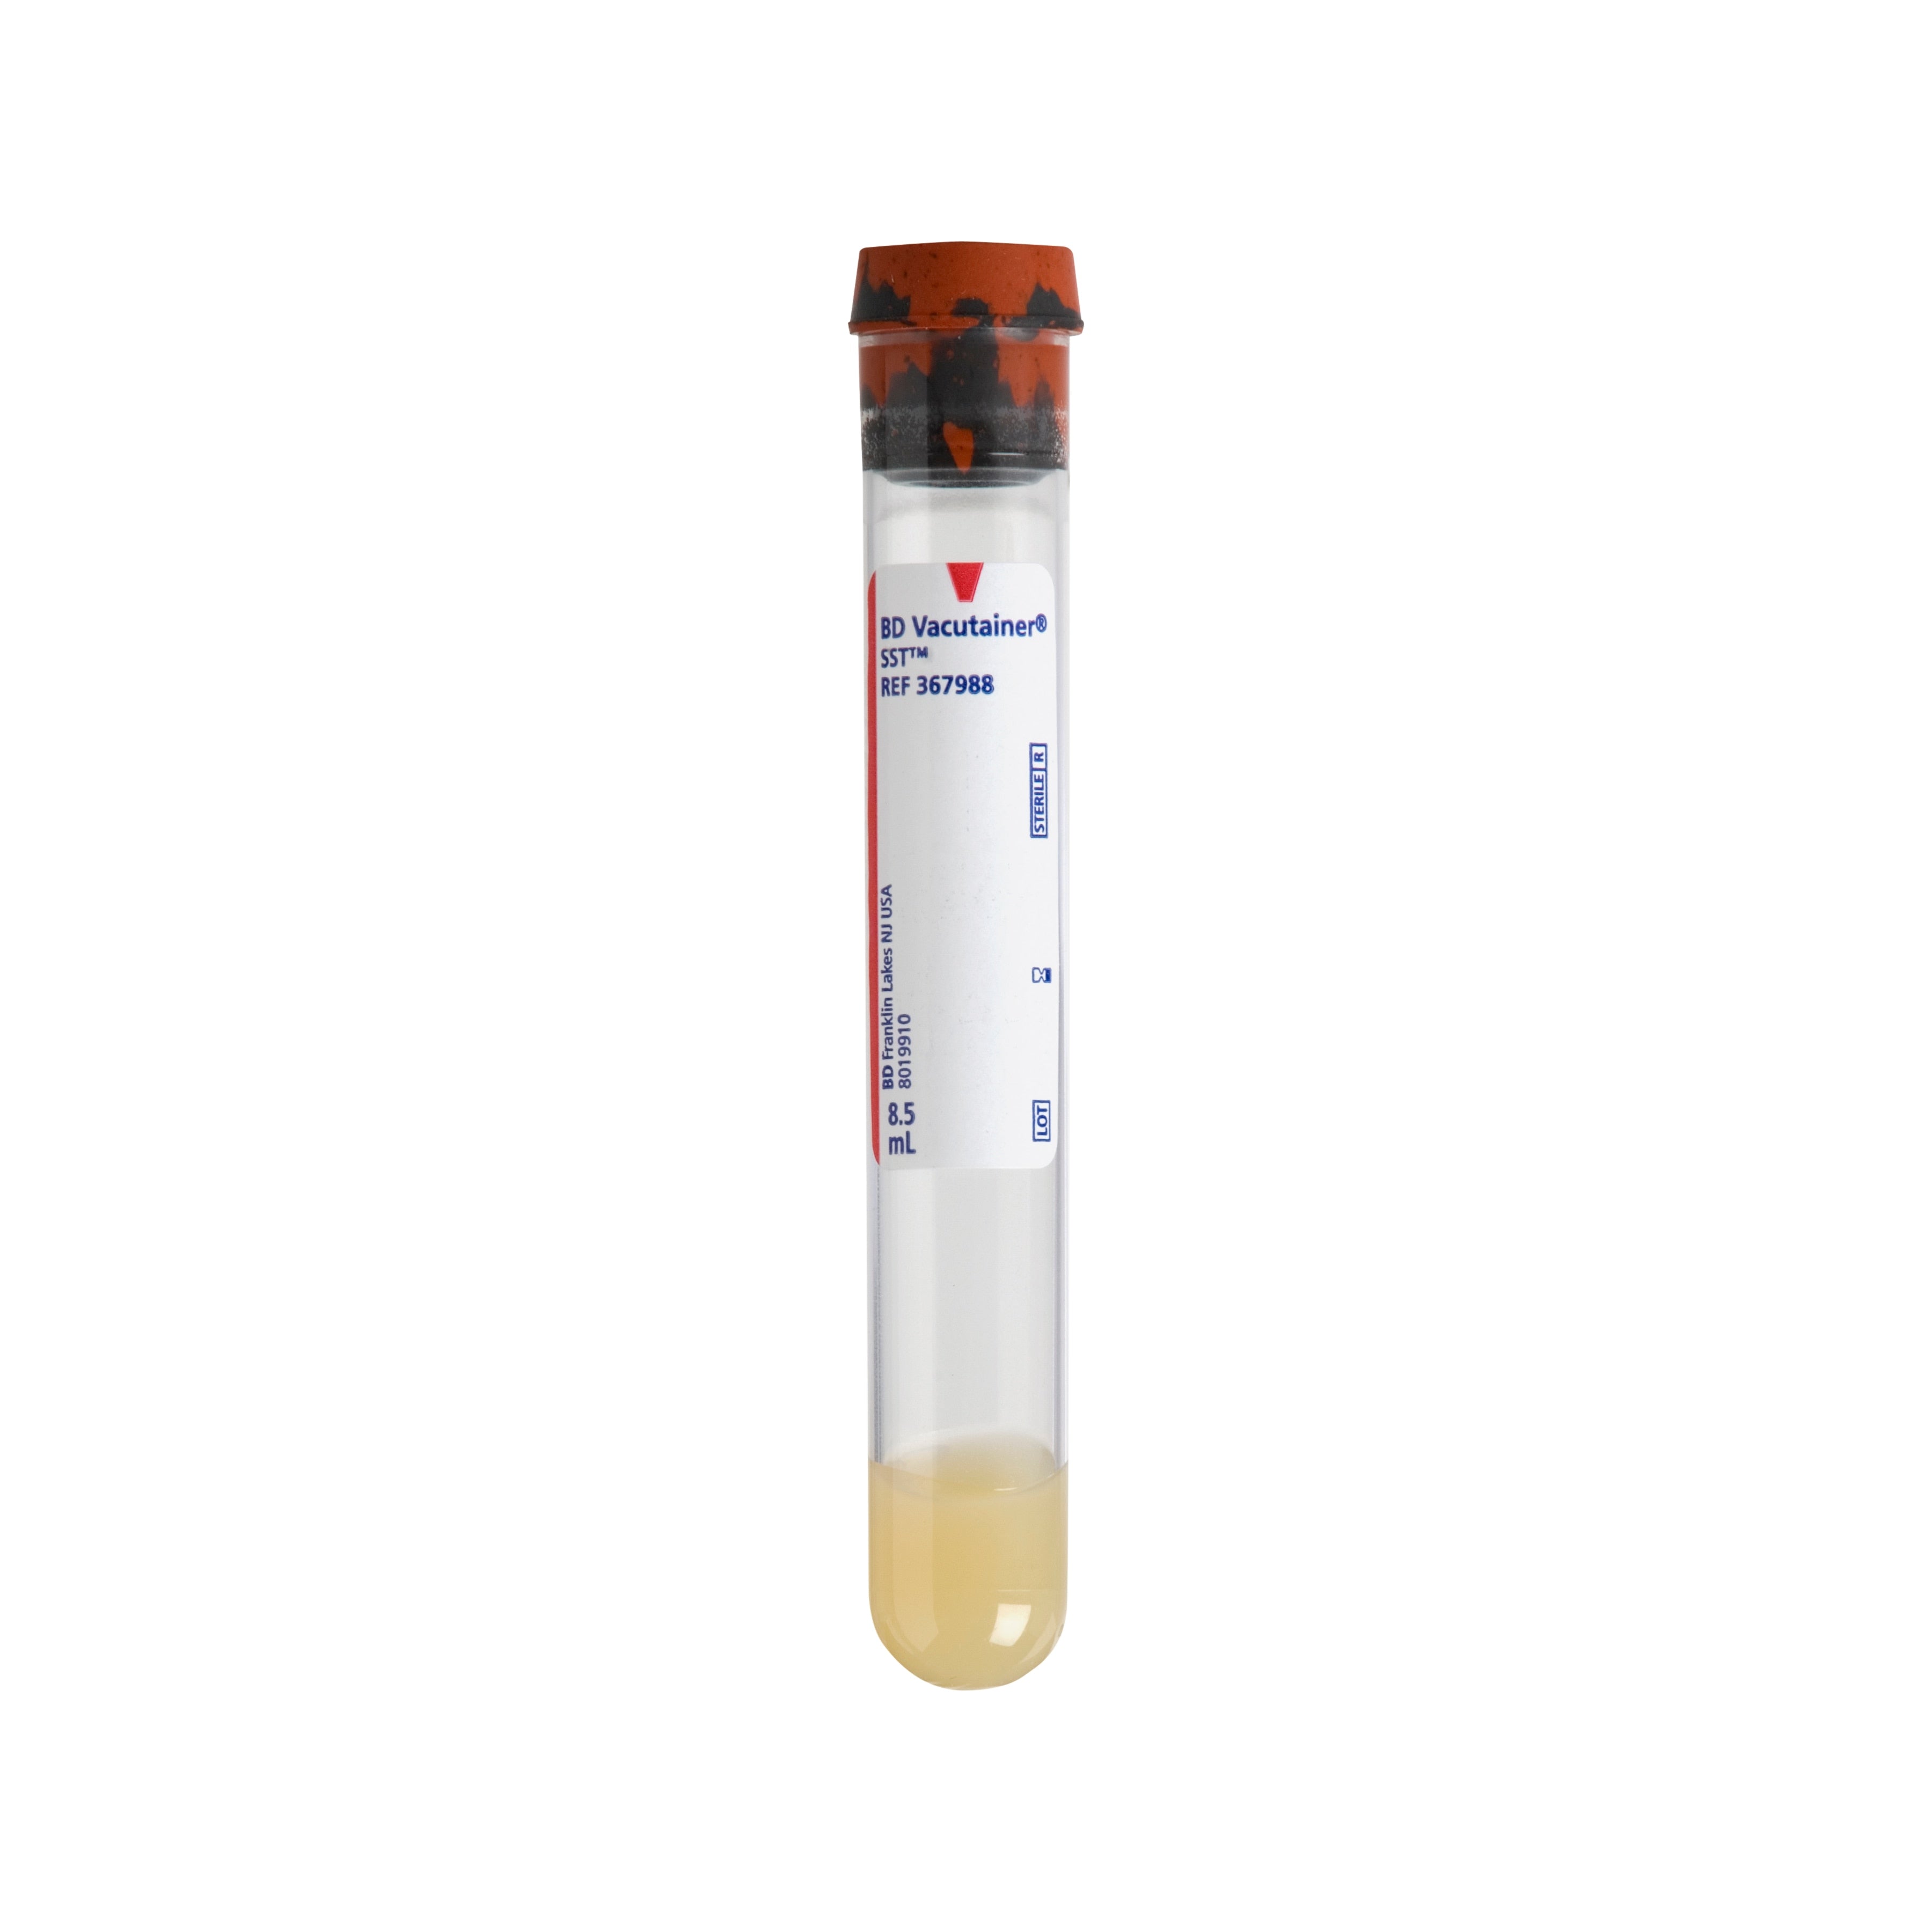 BD Vacutainer 367988 SST Blood Collection Tubes - 16x100 mm, 8.5 mL, Color Coded - 100 tubes